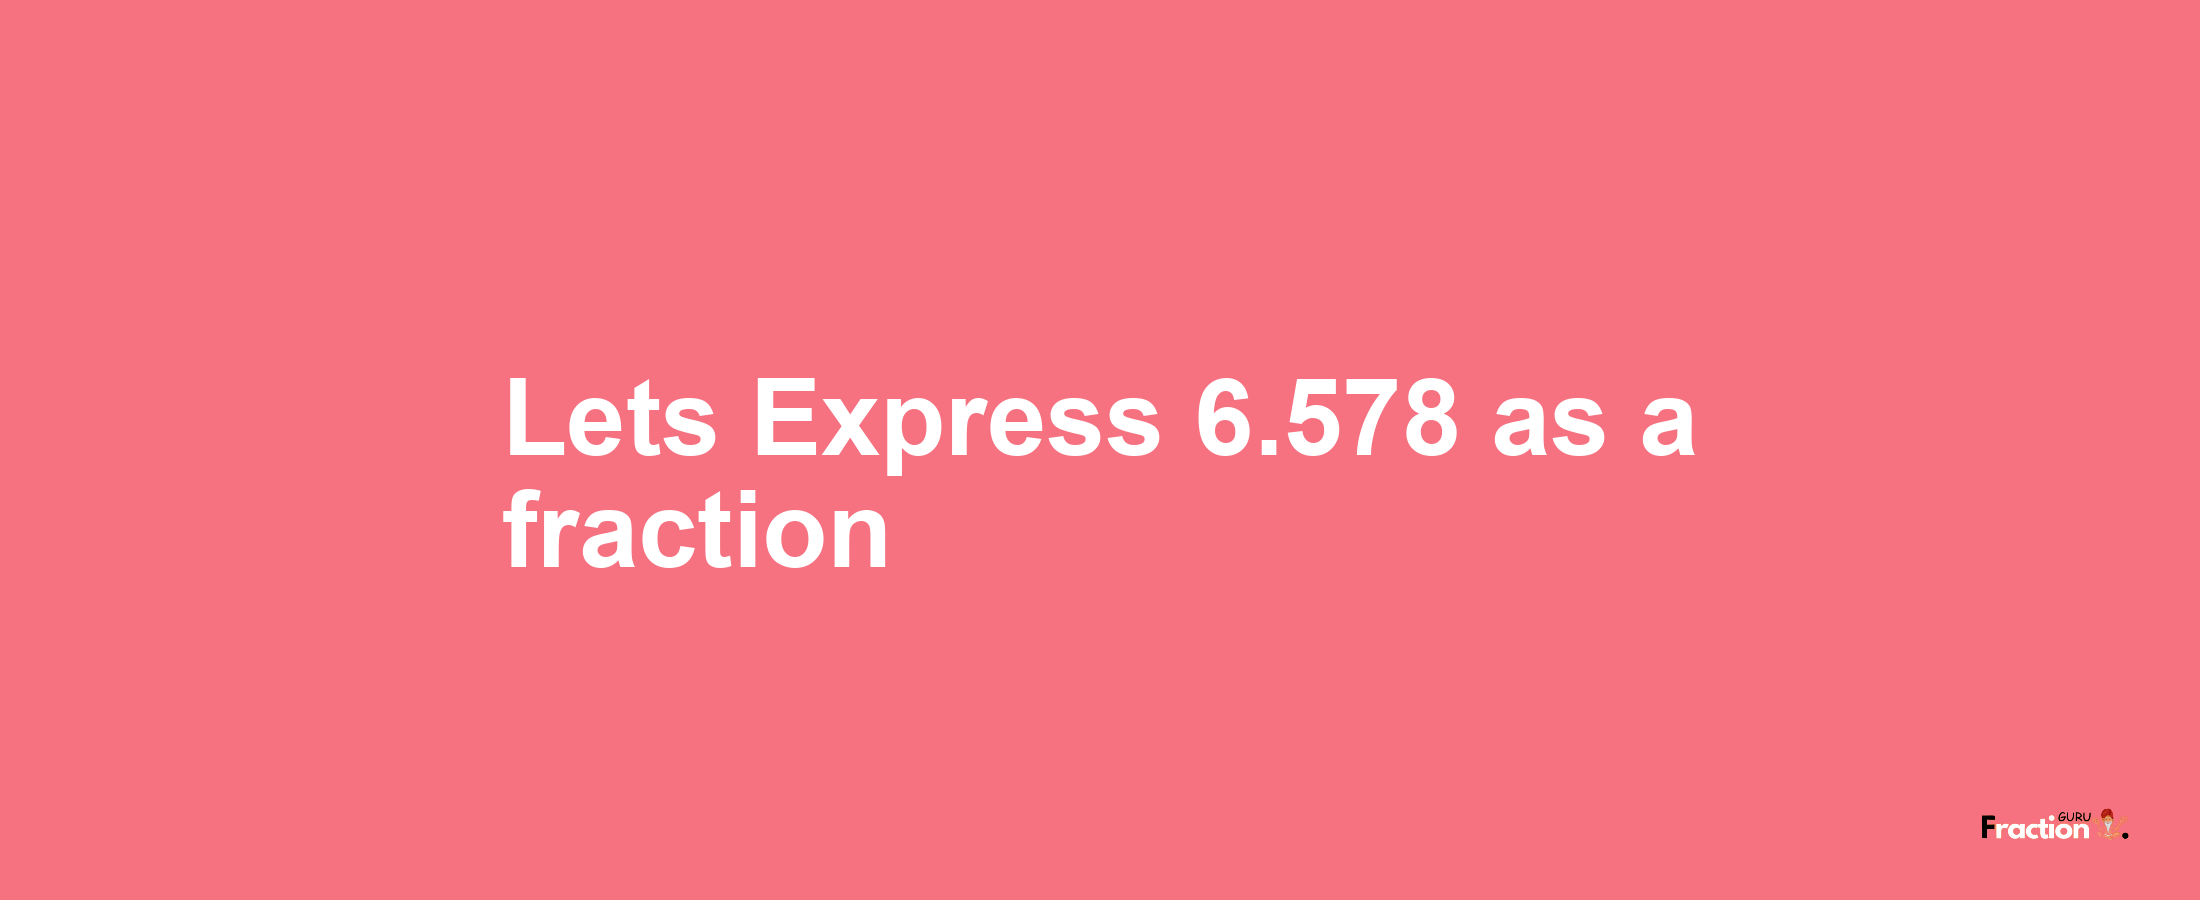 Lets Express 6.578 as afraction